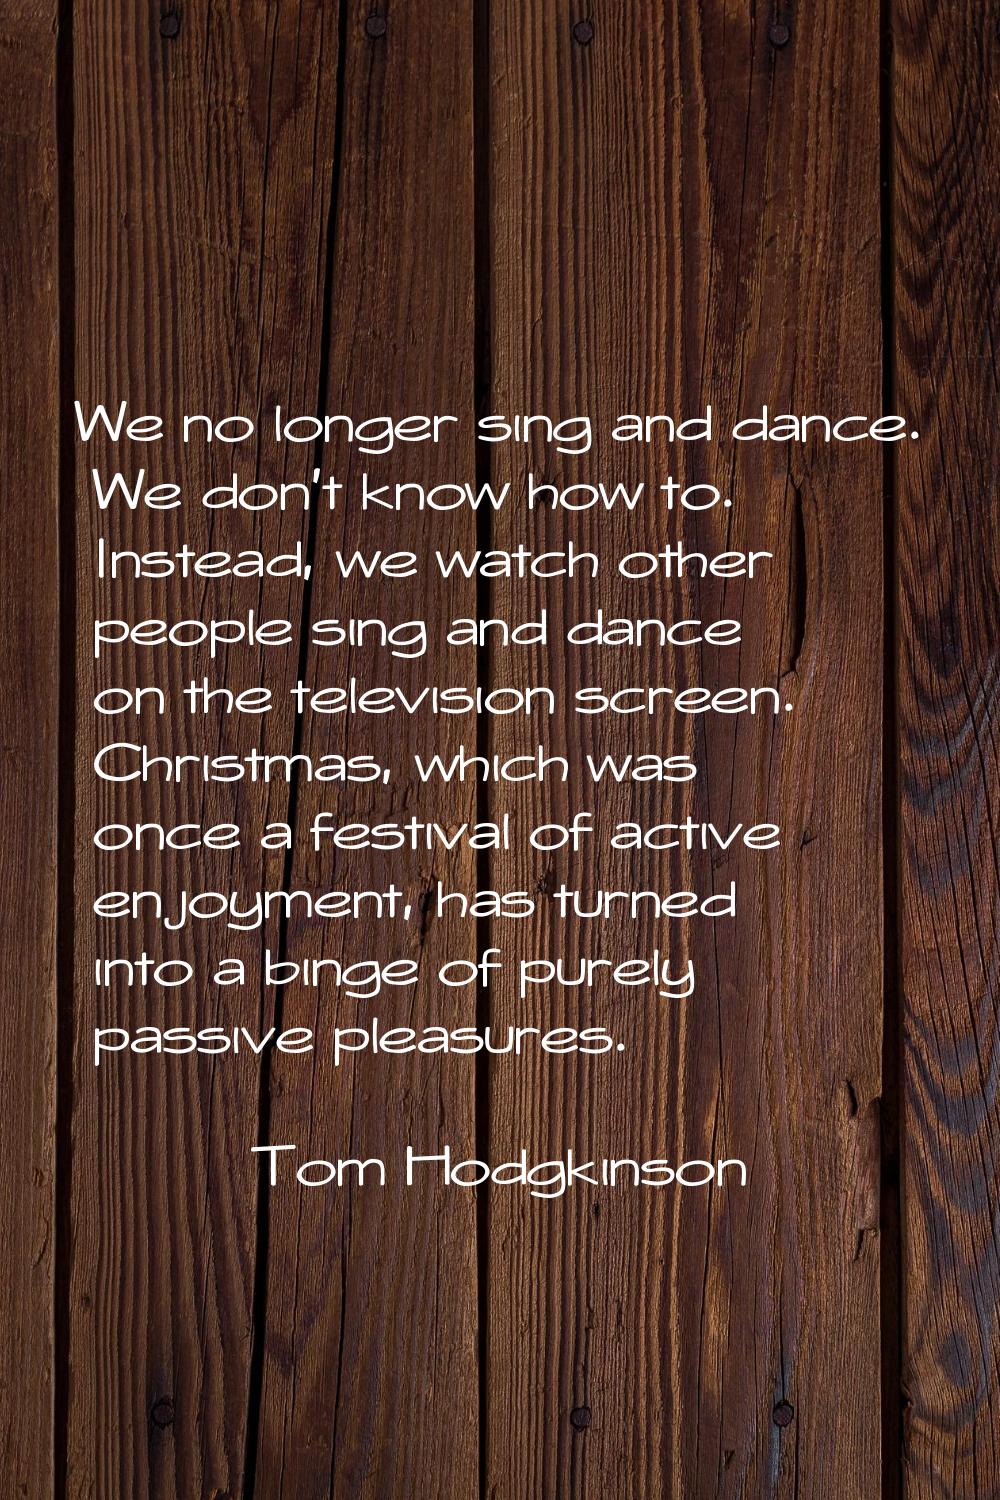 We no longer sing and dance. We don't know how to. Instead, we watch other people sing and dance on